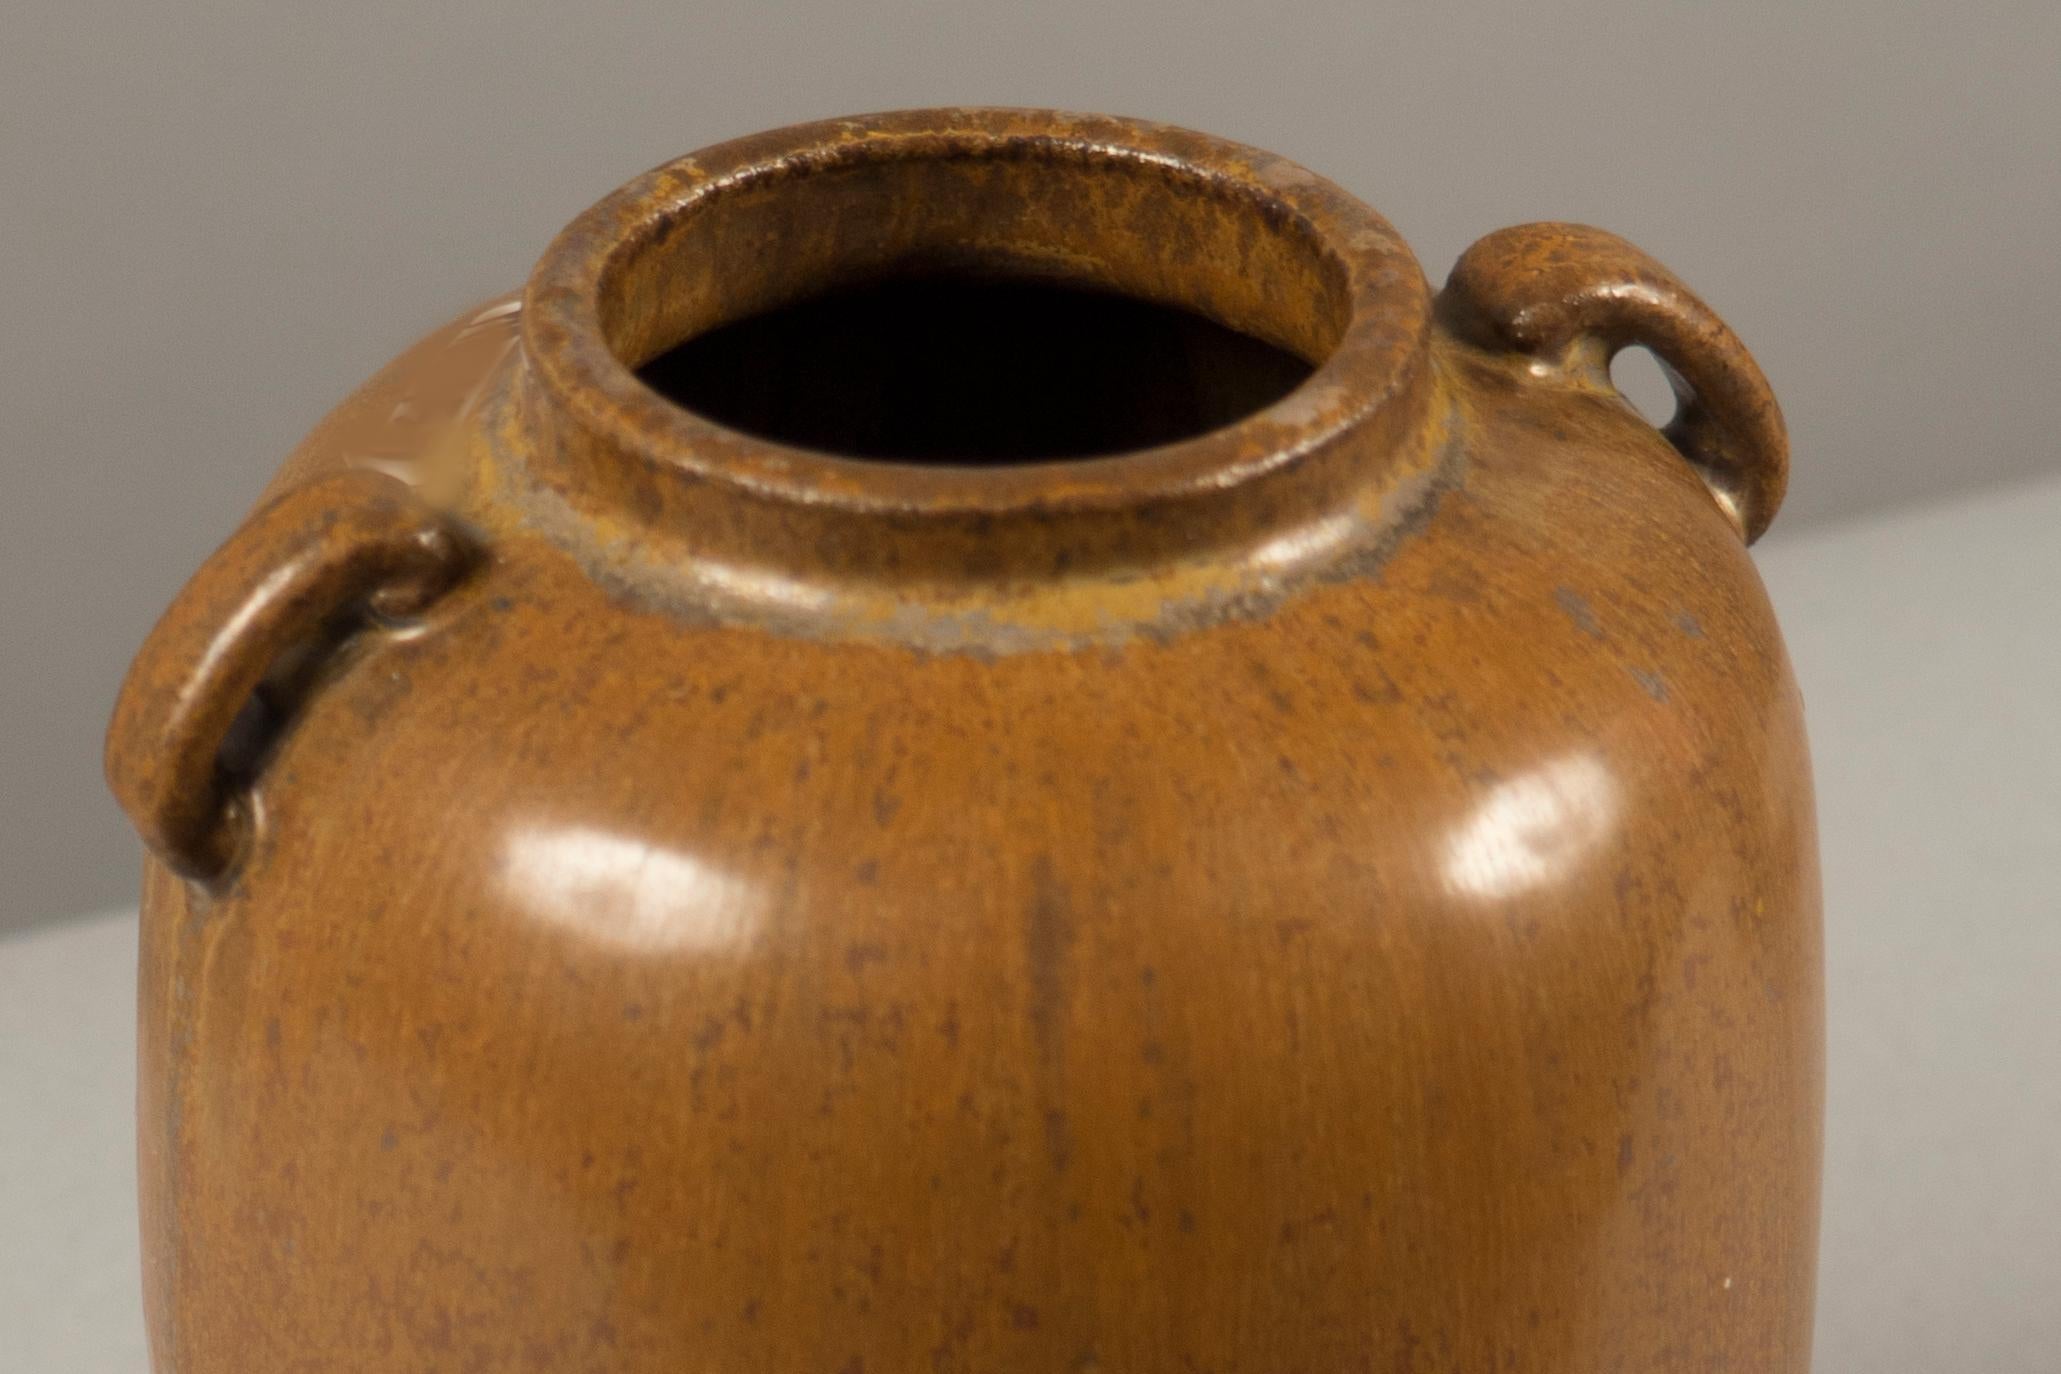 Stoneware vessel with two small handles, decorated in a brown glaze.
   